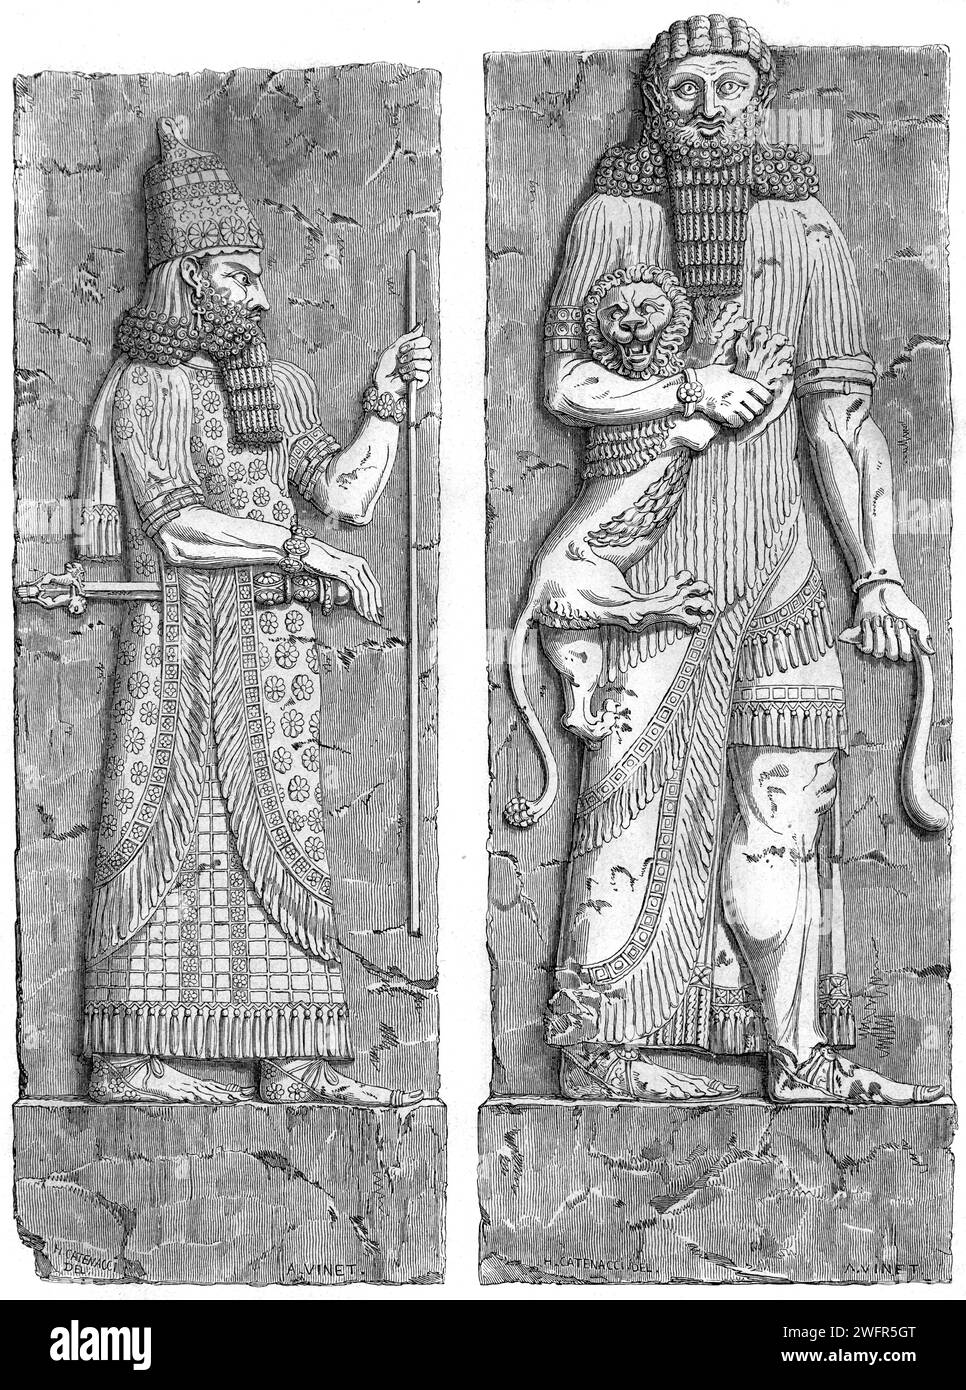 Assyrian Relief, Bas Relief or Stone Carving of Royal Effigy, or Assyrian King, & Assyrian Hercules from Dur-Sharrukin, present day Khorsabad in northern Iraq. Vintage or Historic Engraving or Illustration 1863 Stock Photo